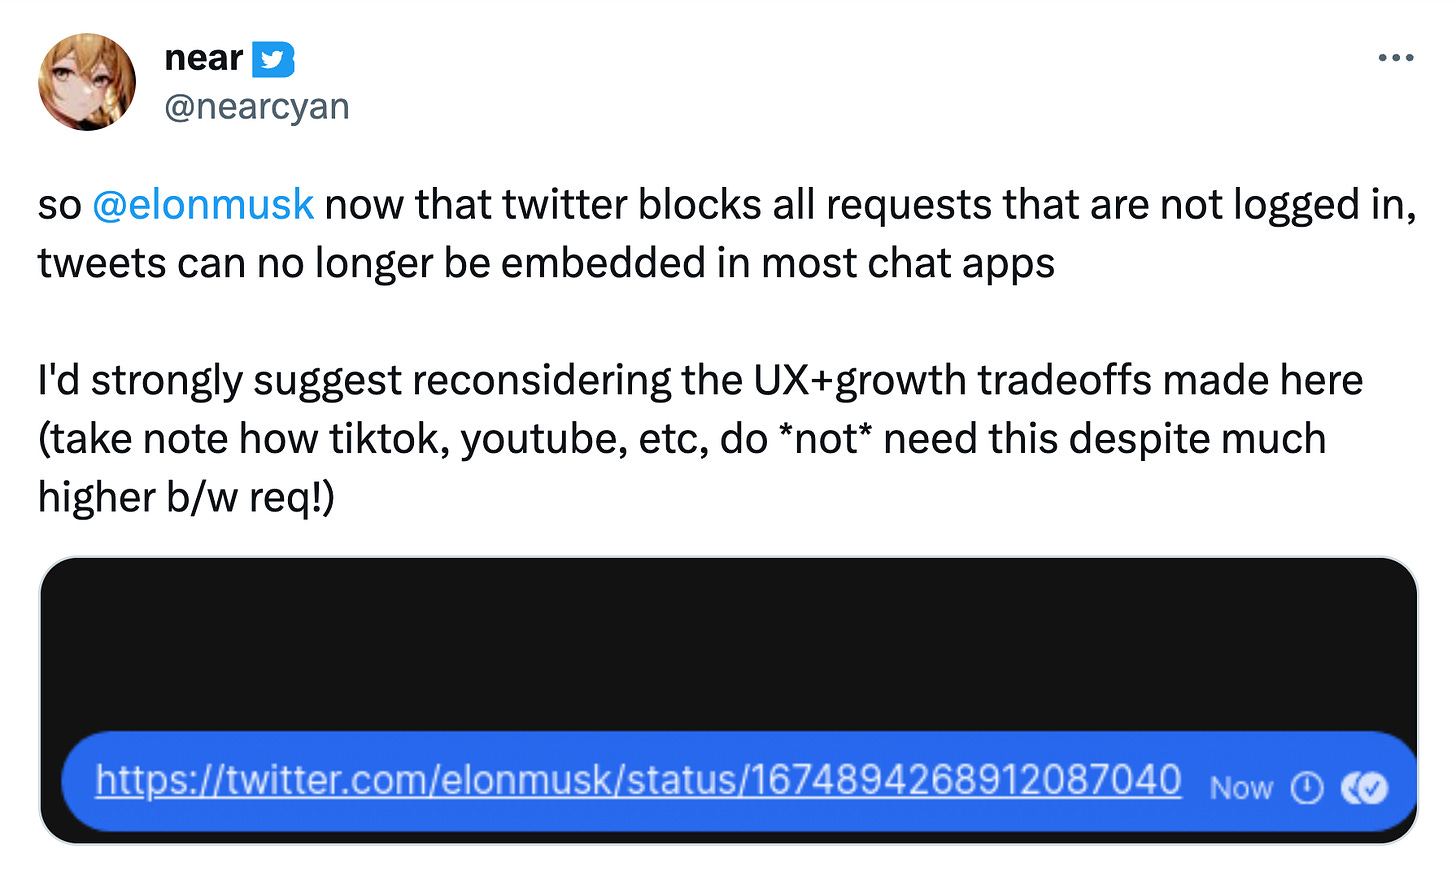 Tweet from nearcyan: so elonmusk now that twitter blocks all requests that are not logged in, tweets can no longer be embedded in most chat apps I'd strongly suggest reconsidering the UX+growth tradeoffs made here. take note how tiktok, youtube, etc, do not need this despite much higher b/w req